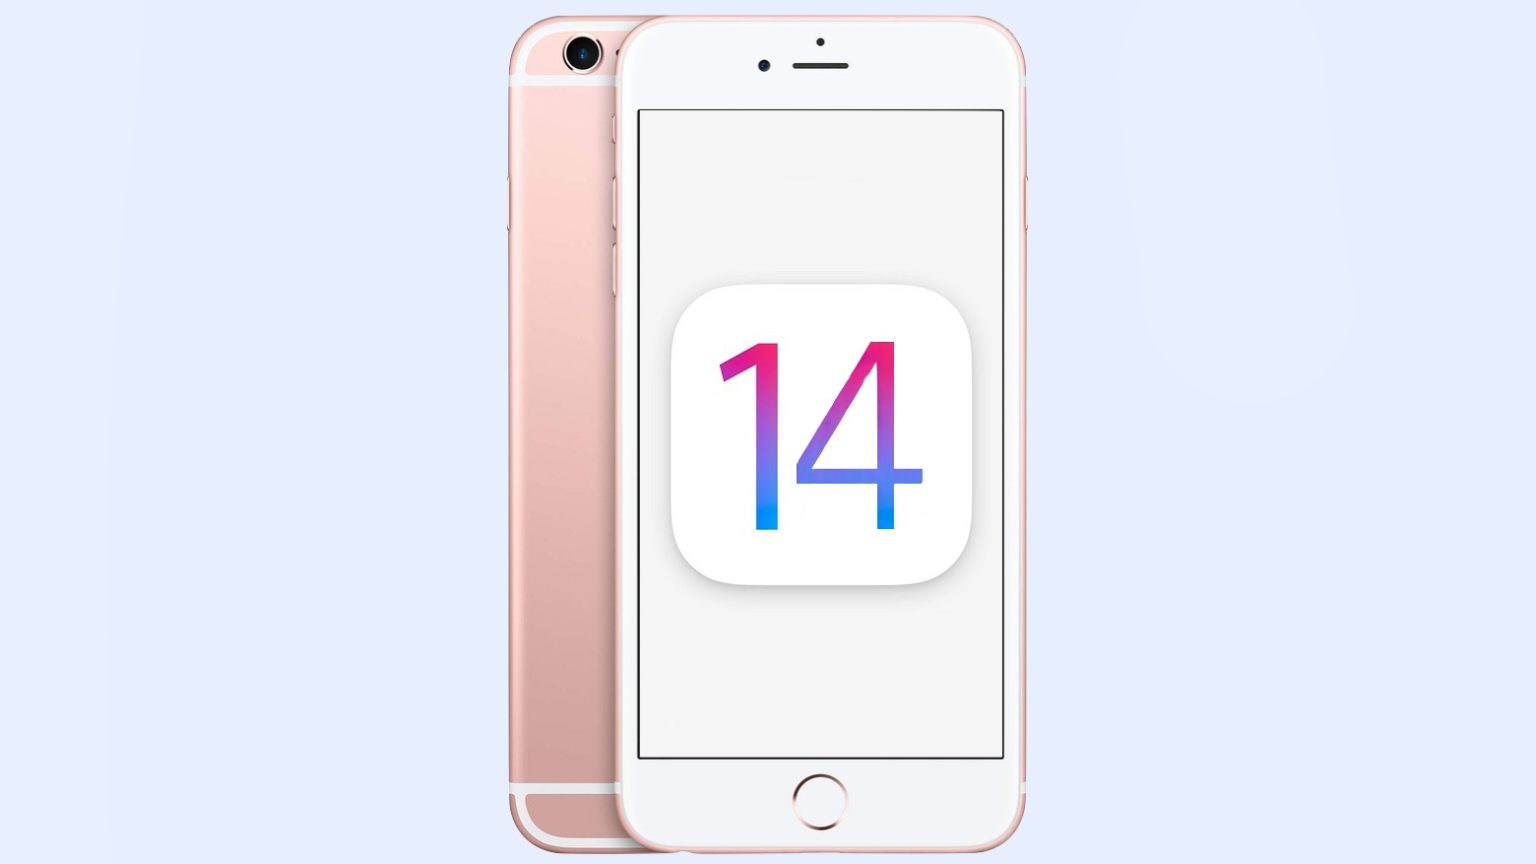 iOS 14 will reportedly run on many older iPhone models